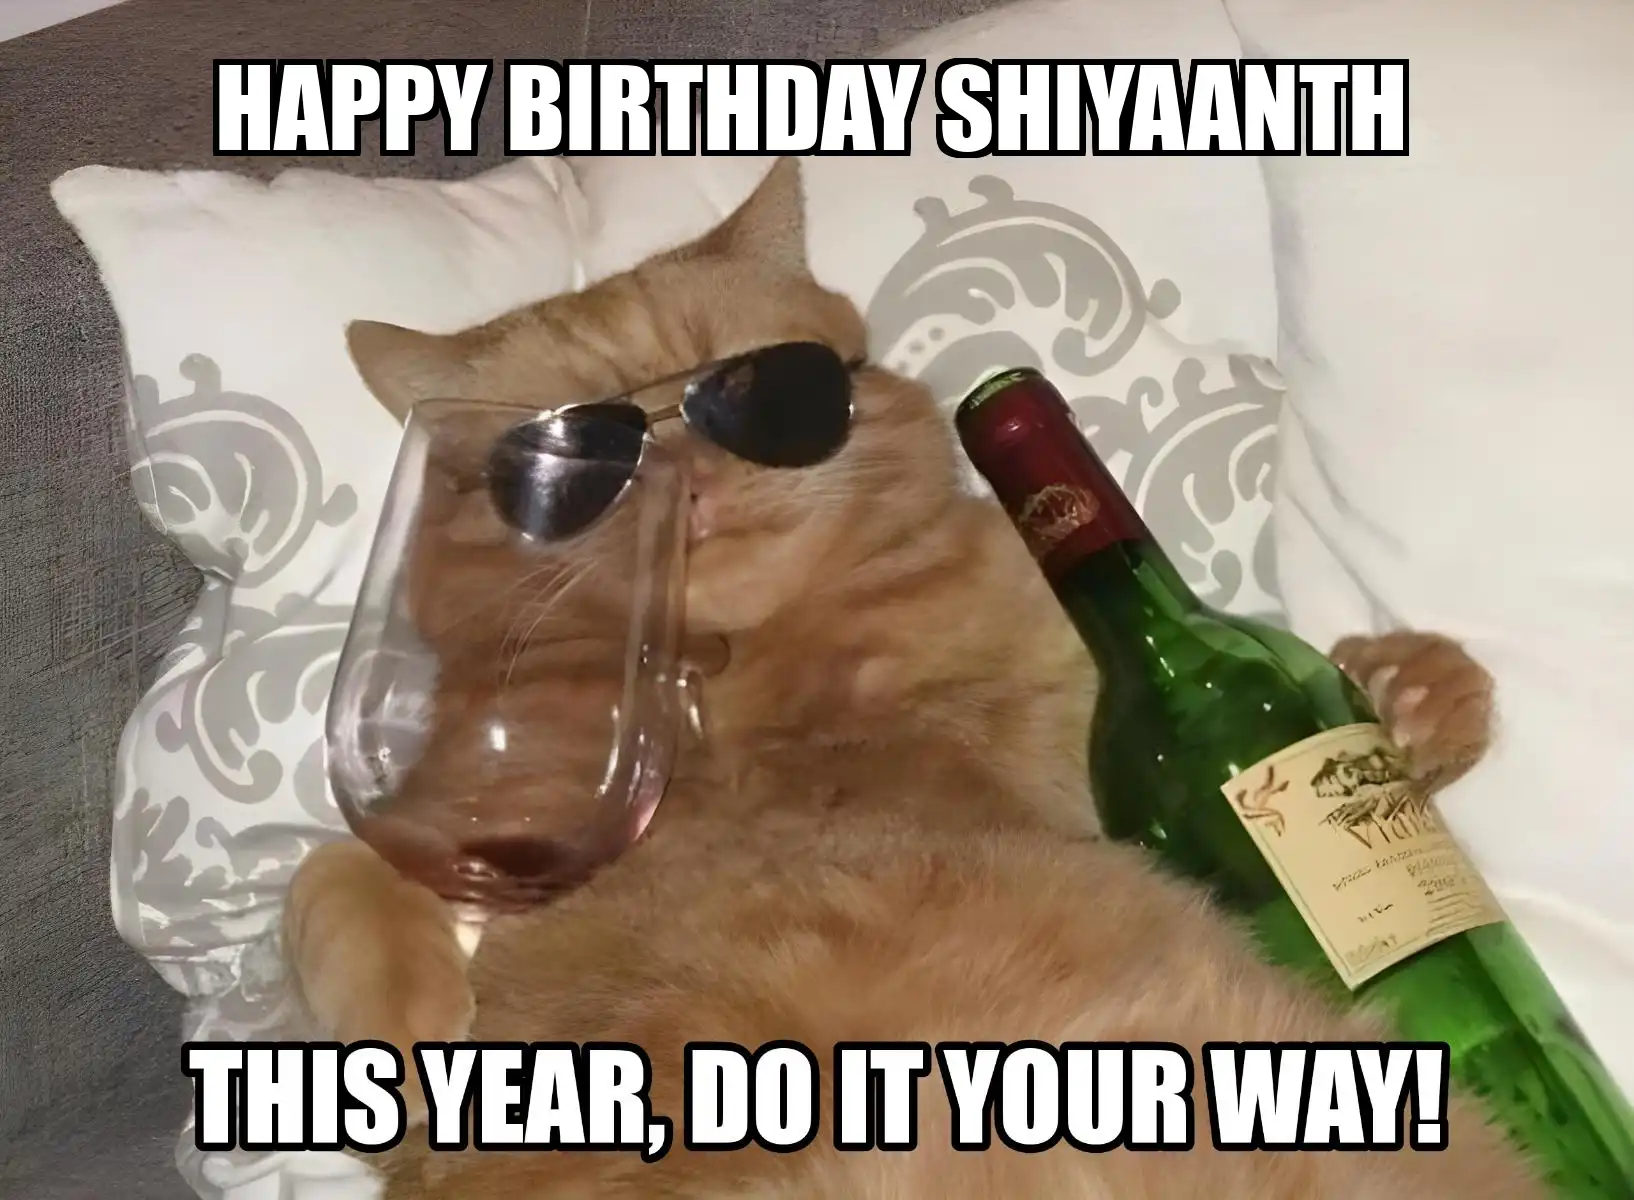 Happy Birthday Shiyaanth This Year Do It Your Way Meme